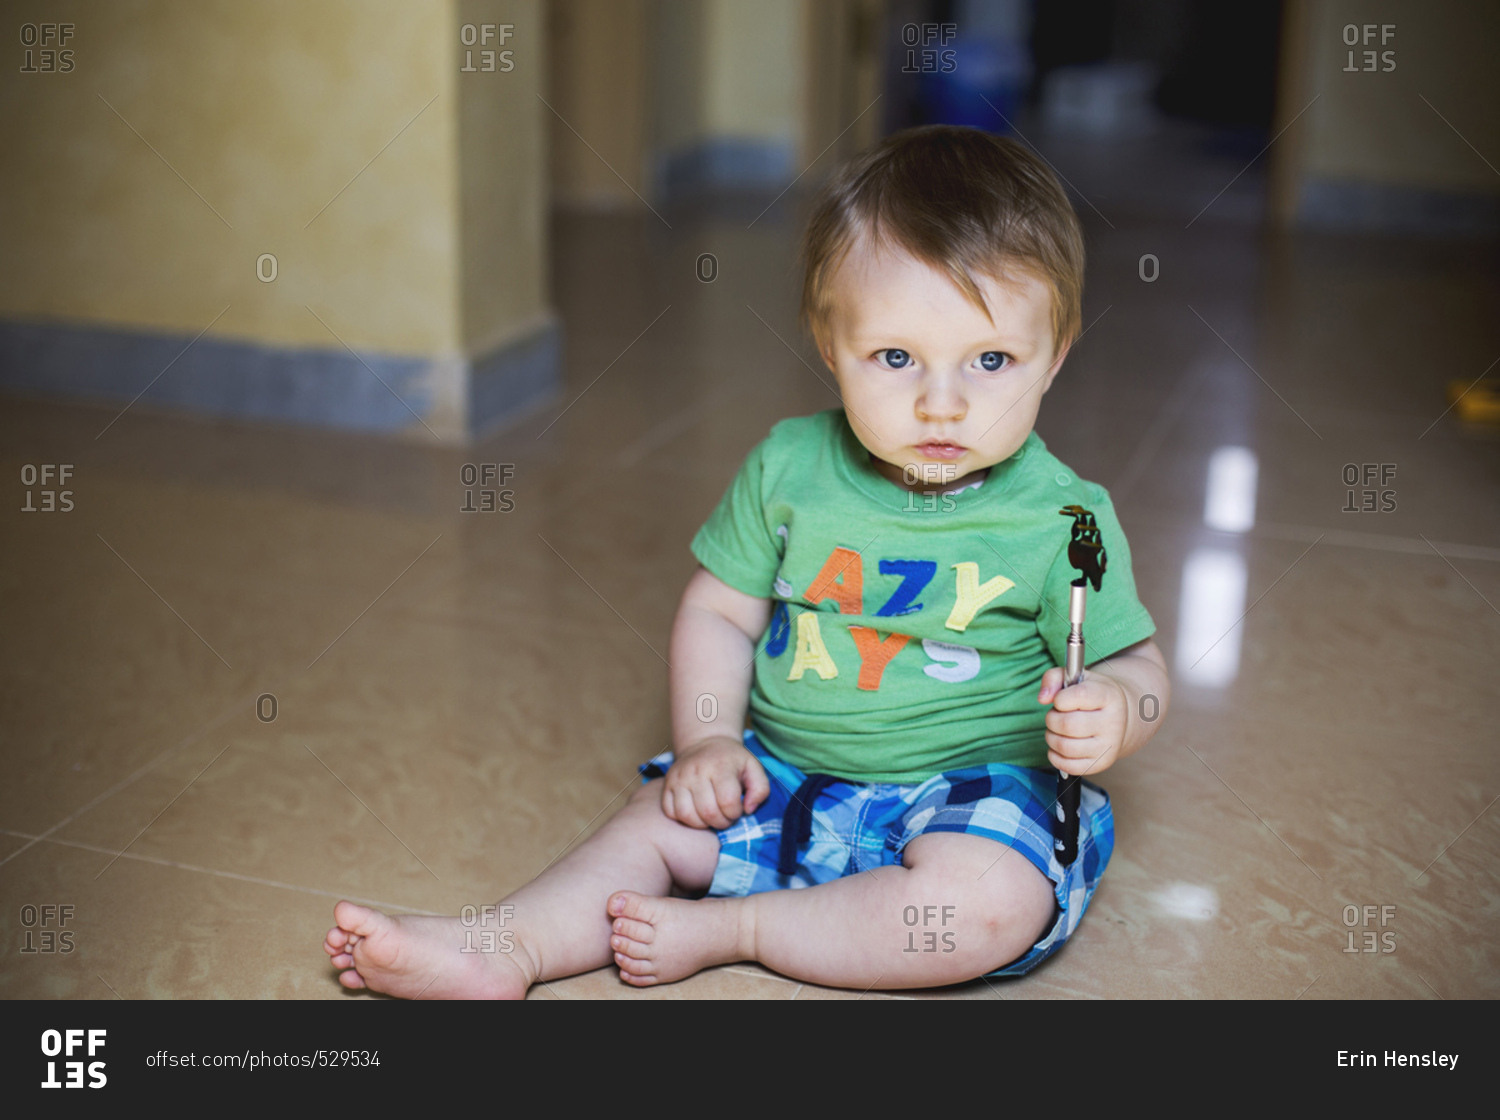 Boy holding a pet scratching toy